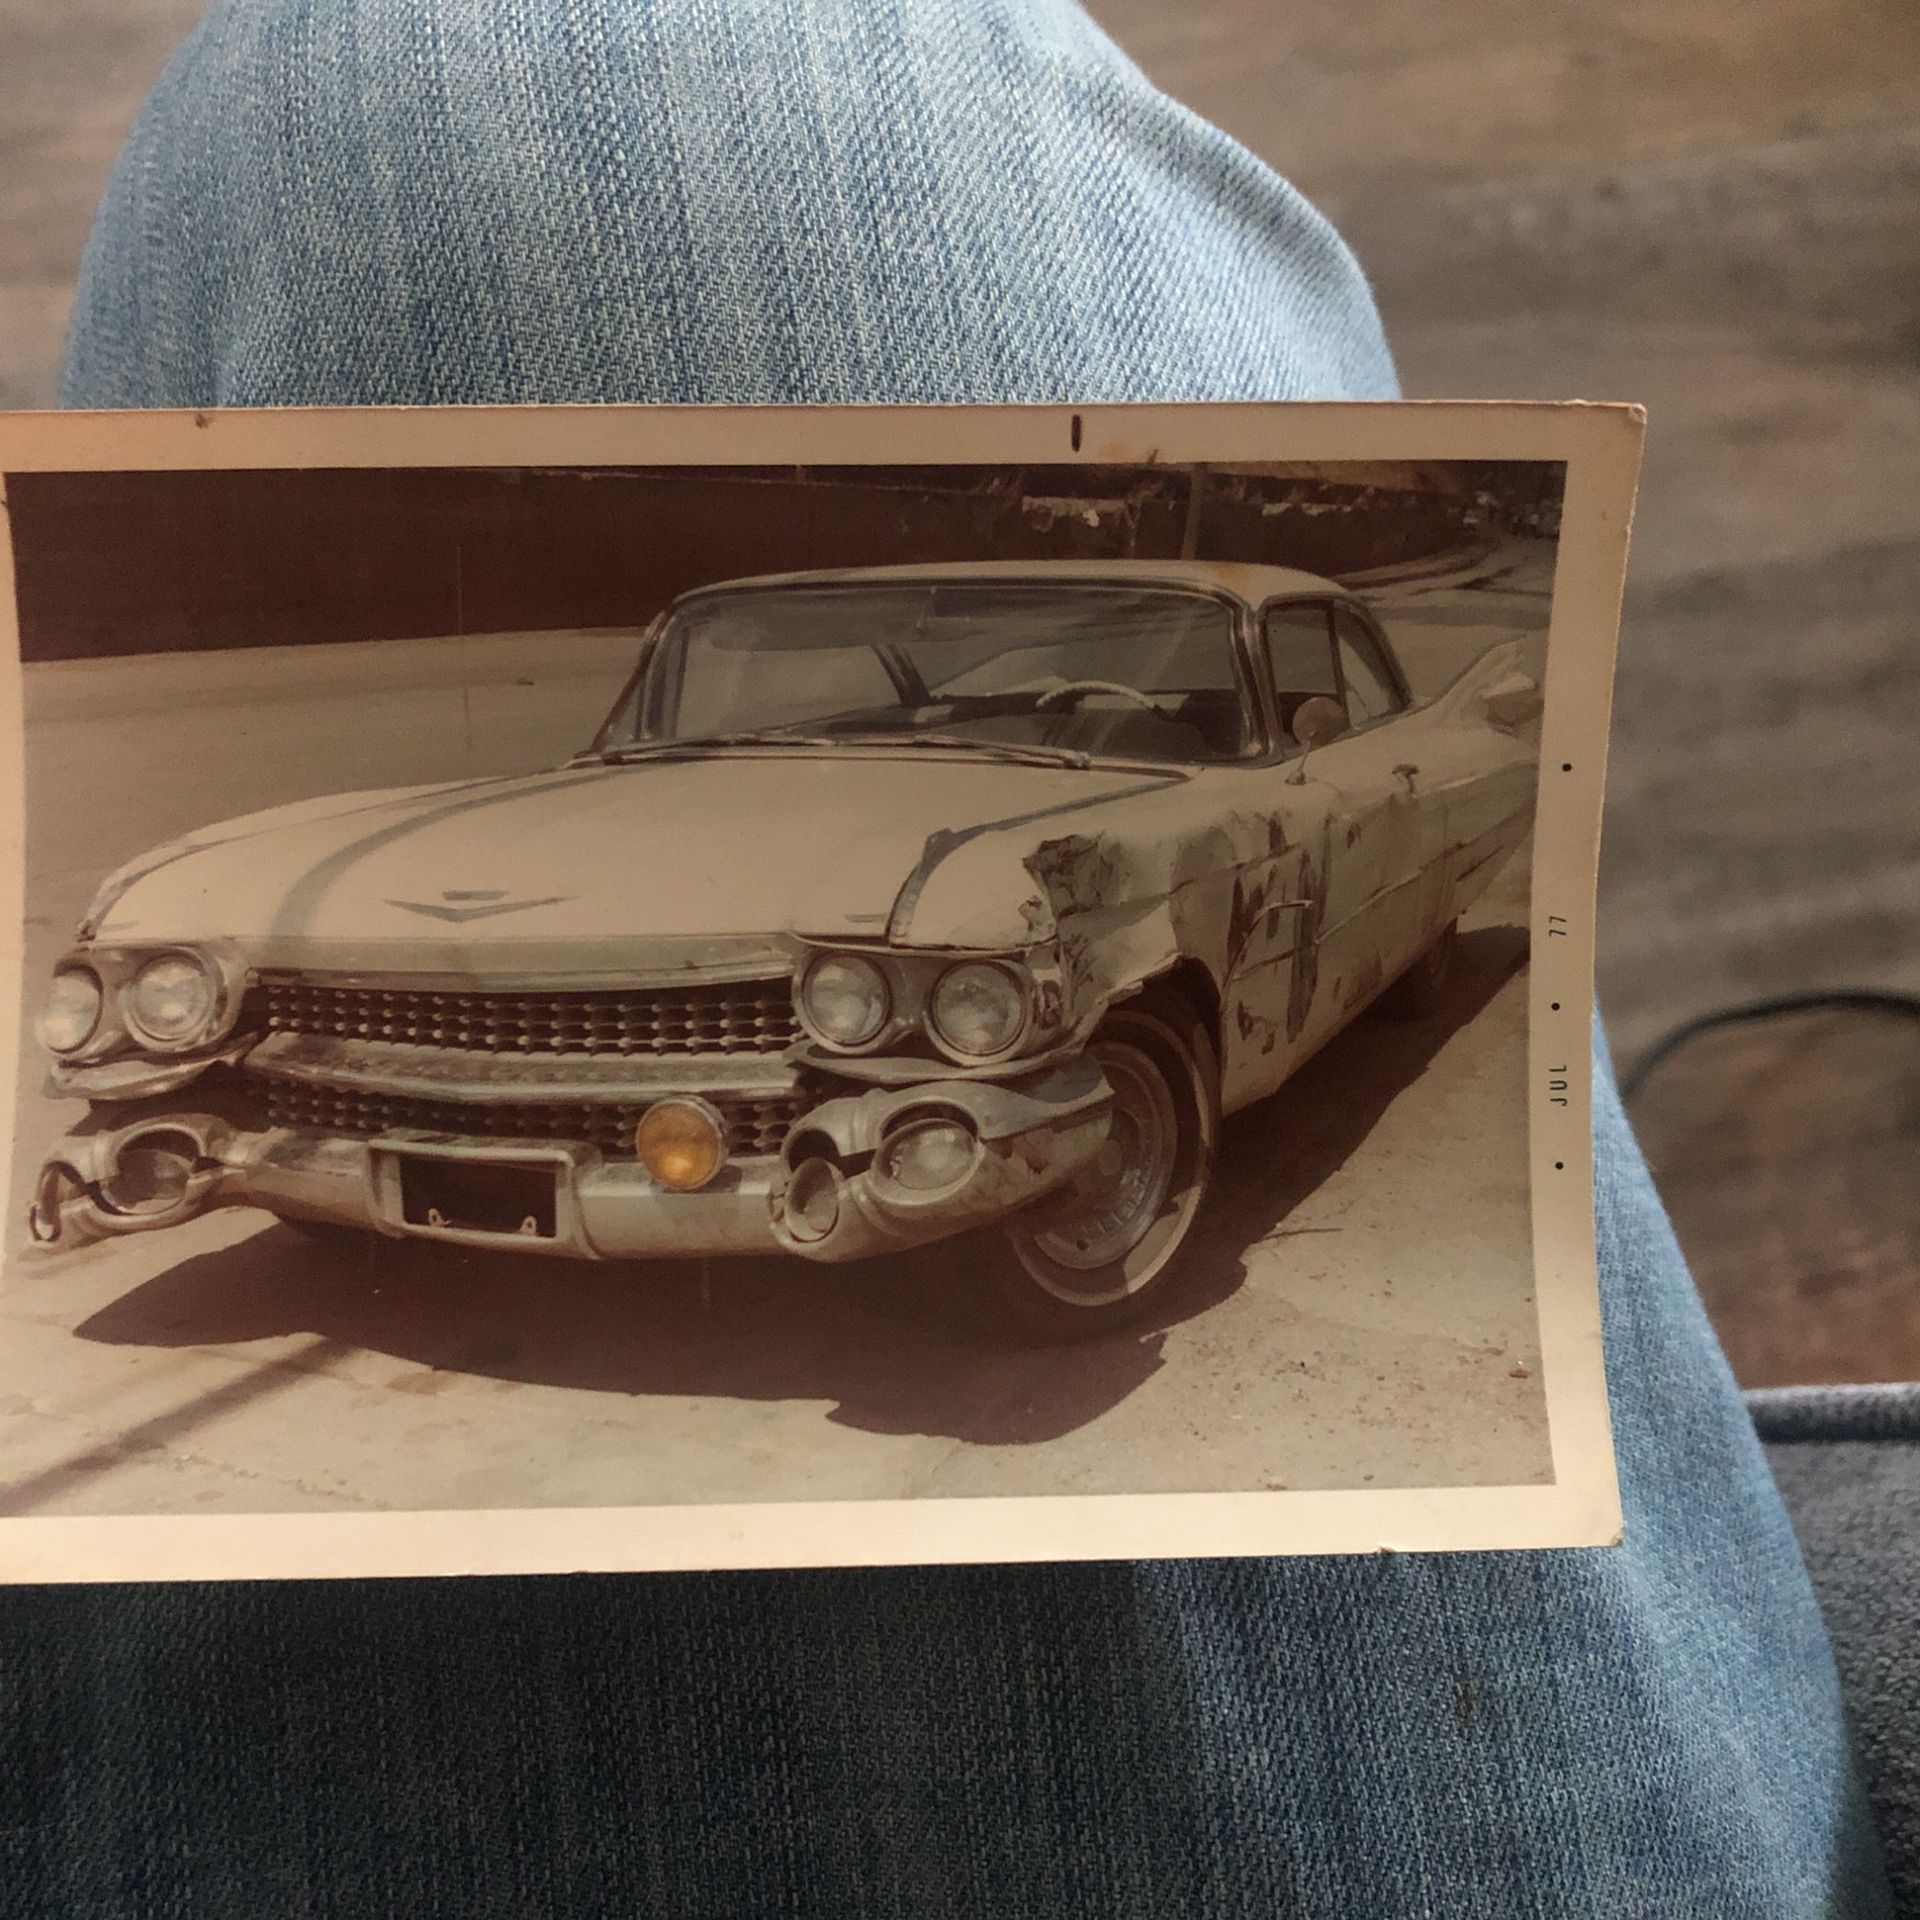 Original one of a kind photo of the Cadillac used in the movie Deer Hunter